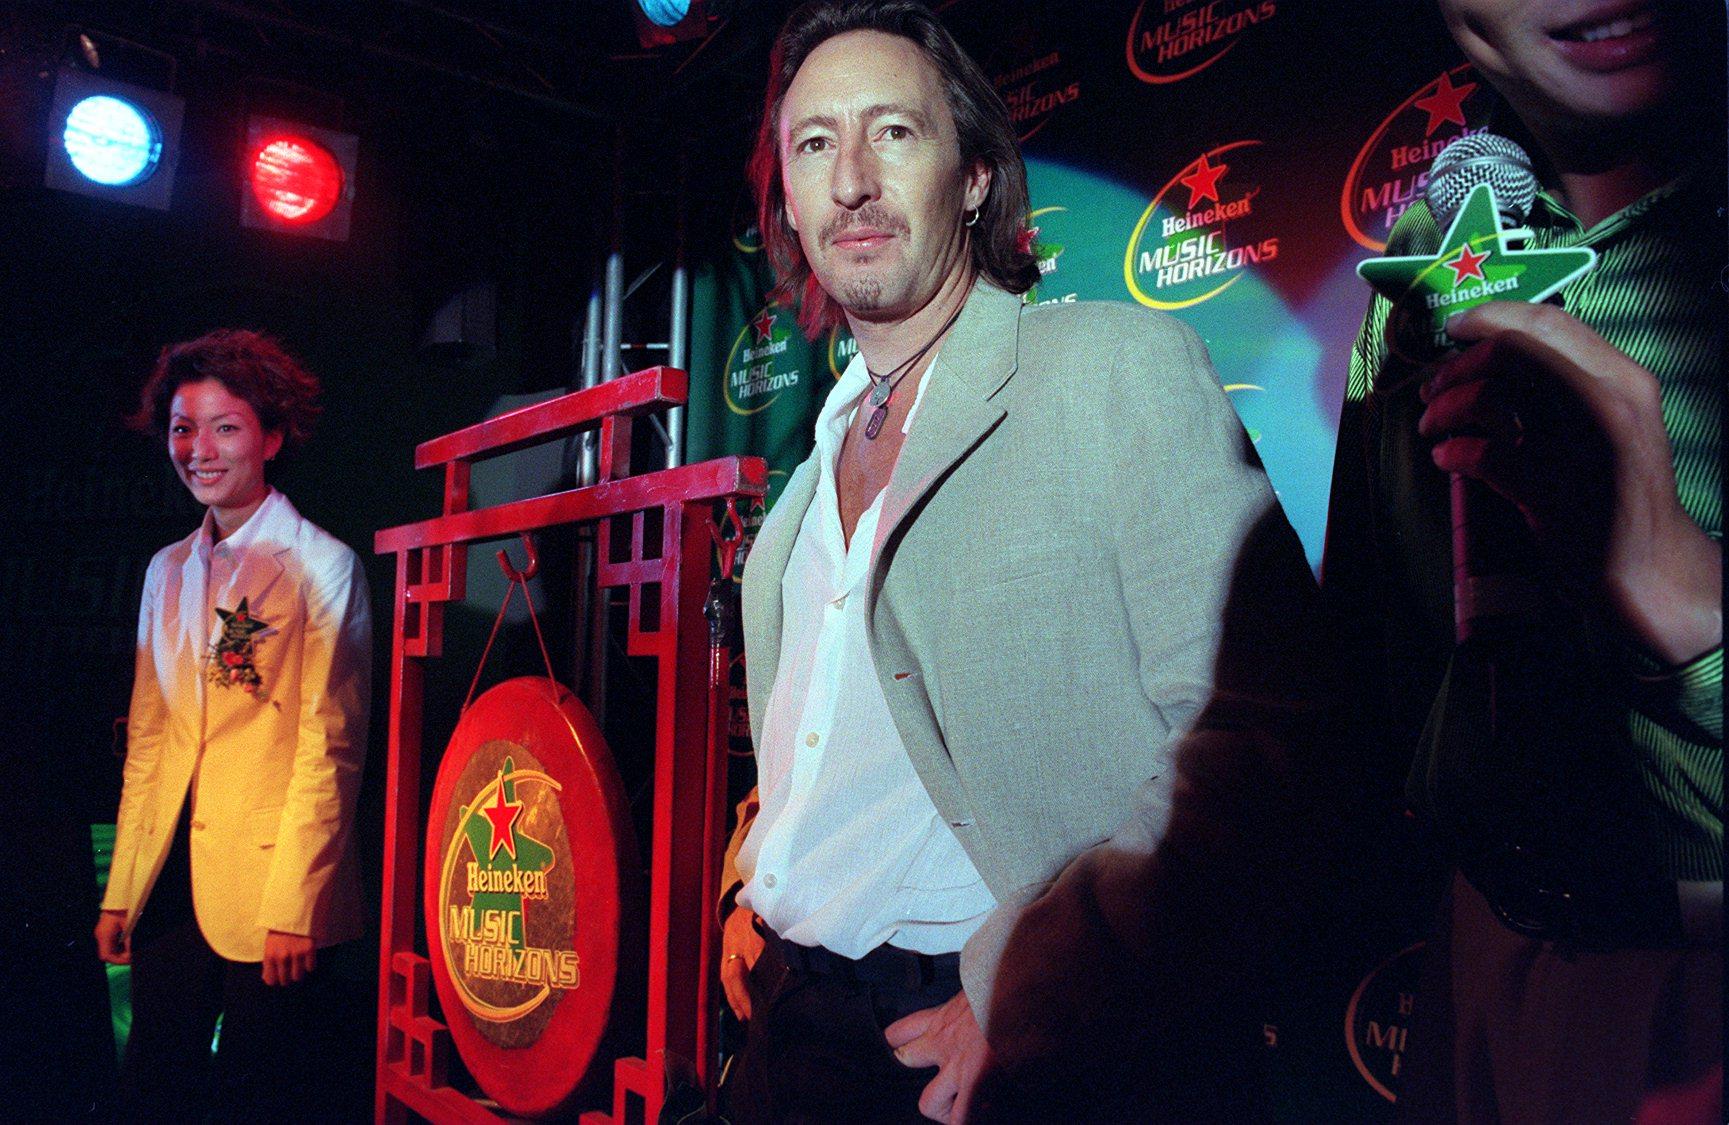 Julian Lennon has recently come out of the shadows. Photo: SCMP Archive